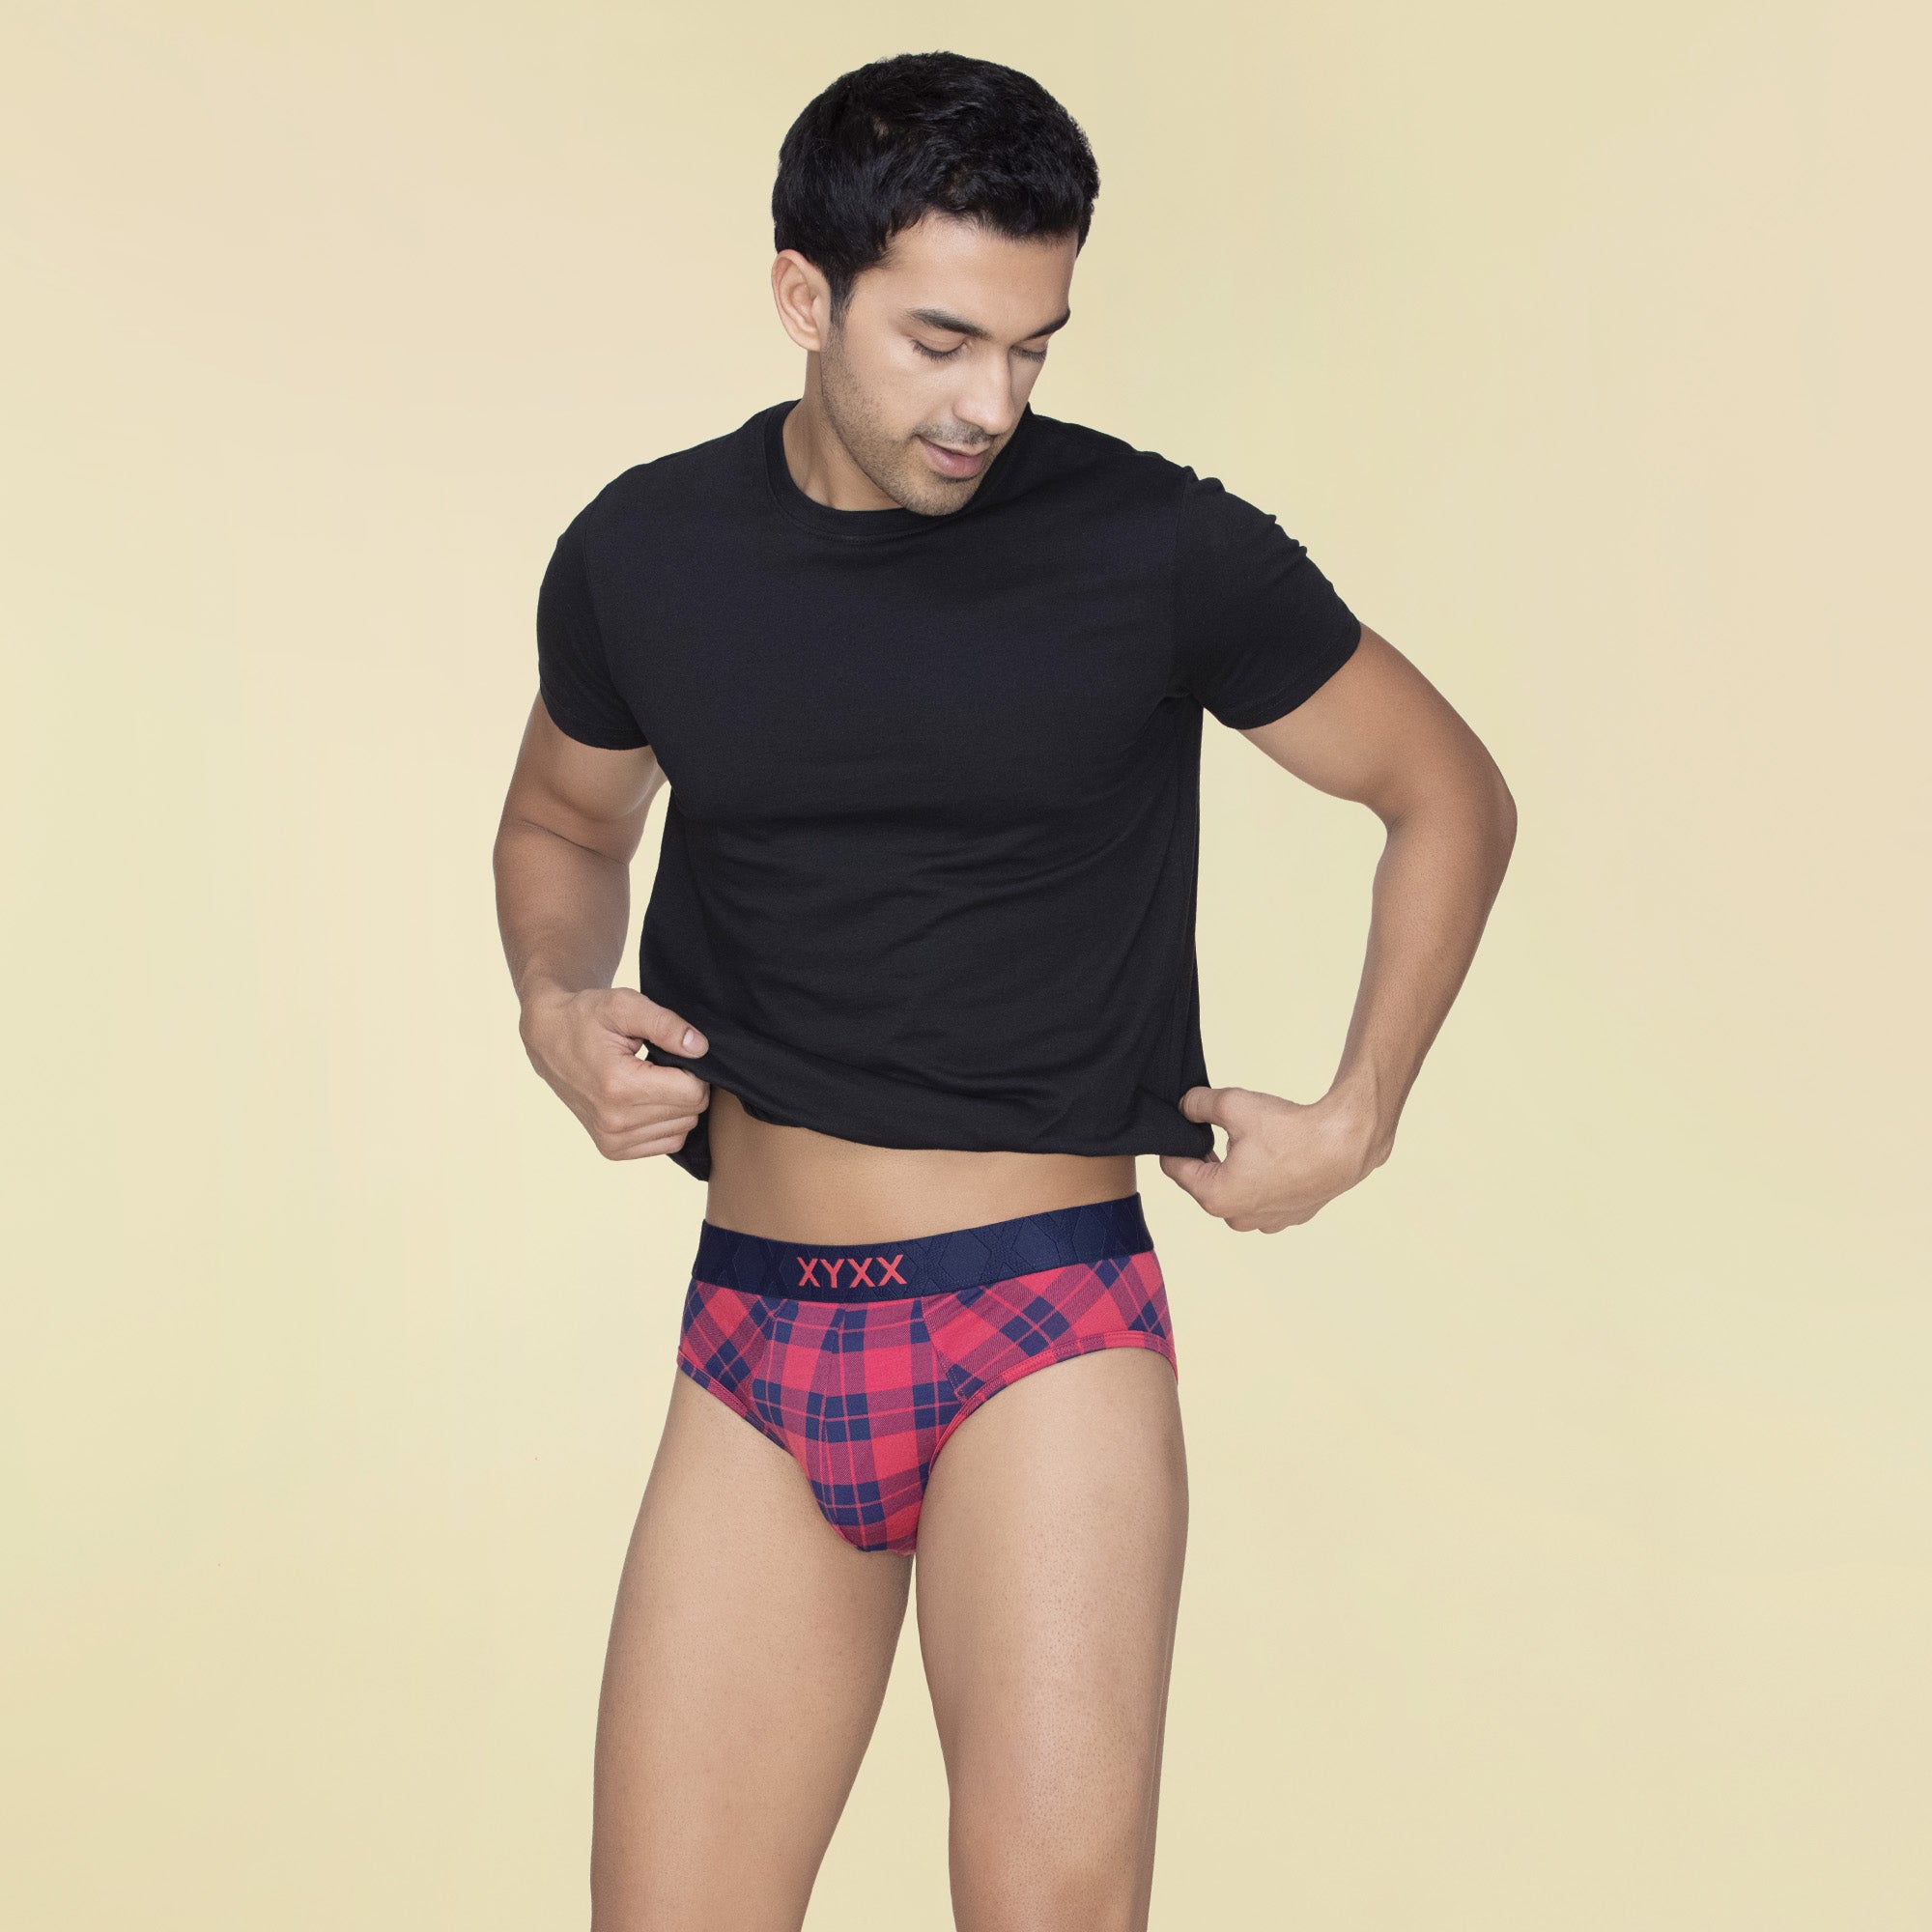 Buy Comfortable Fabric Customized Adult Males Boxer Briefs Young Men  Underwear from Guangdong Qicaifeixia Knitting Industrial Co., Ltd., China